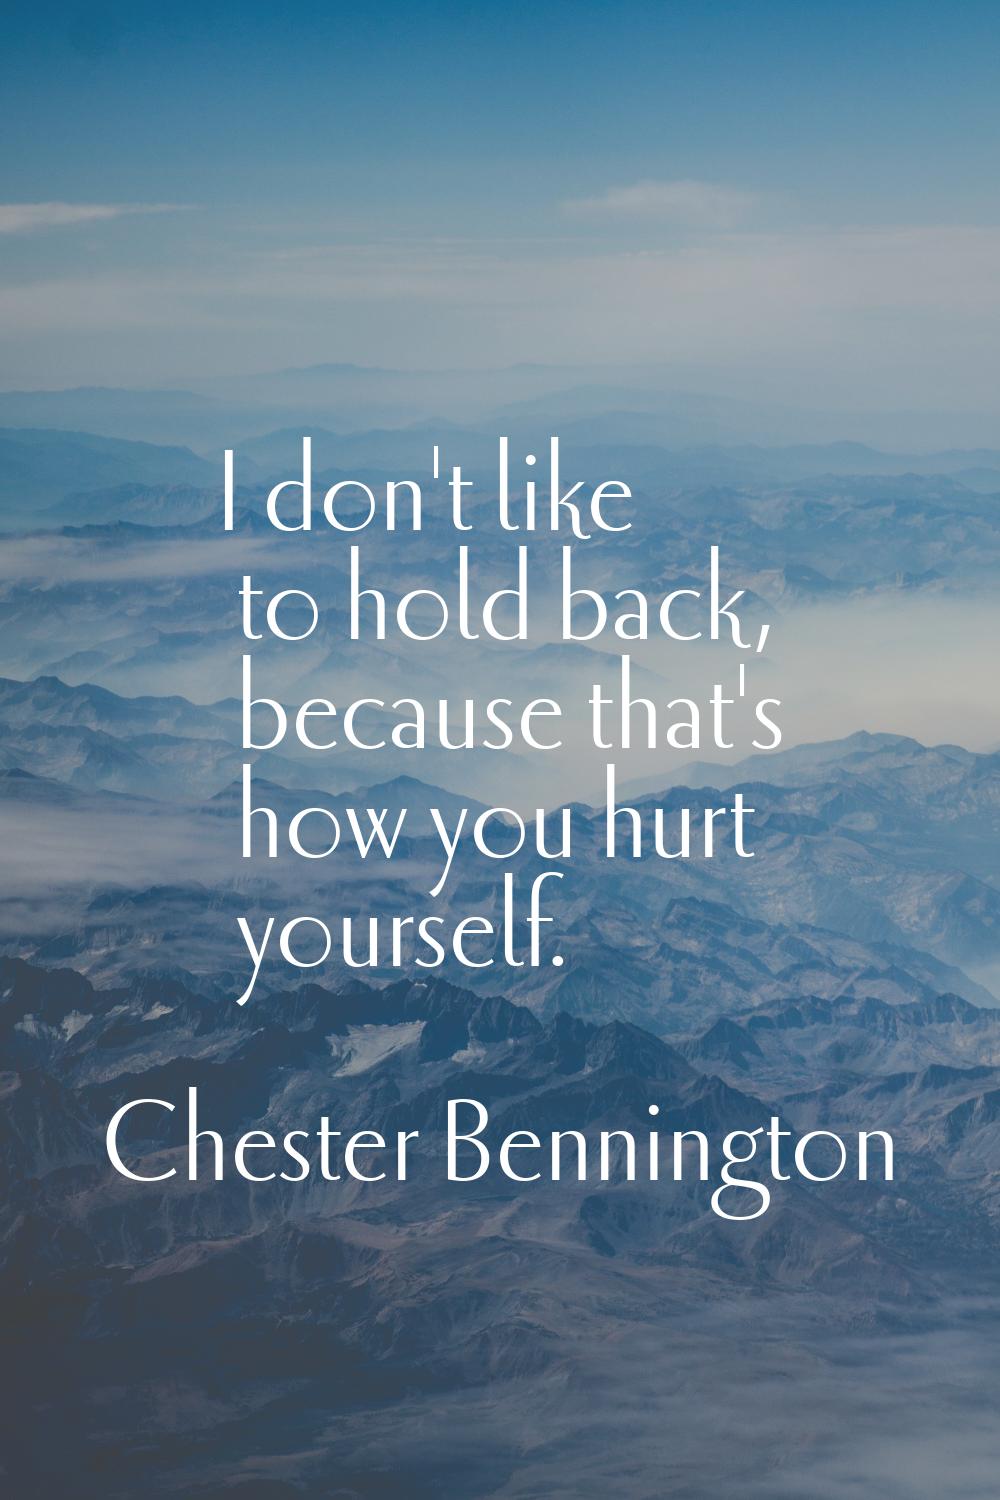 I don't like to hold back, because that's how you hurt yourself.